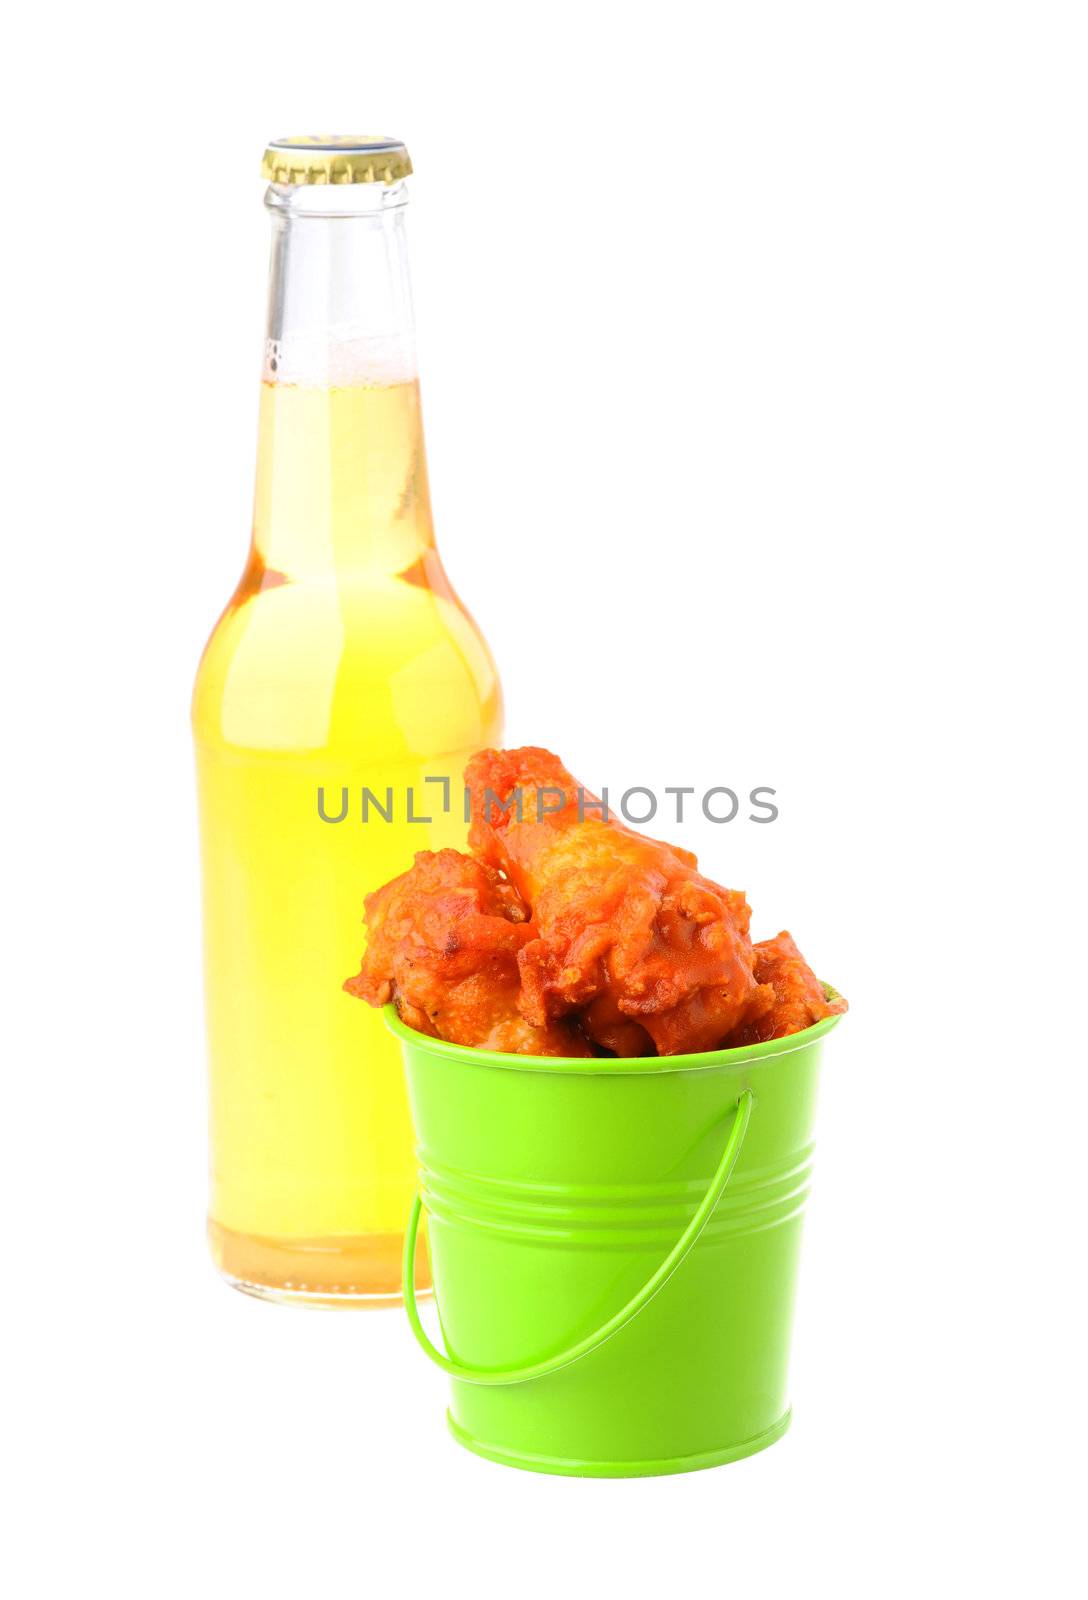 Small green bucket filled with spicy chicken wings.